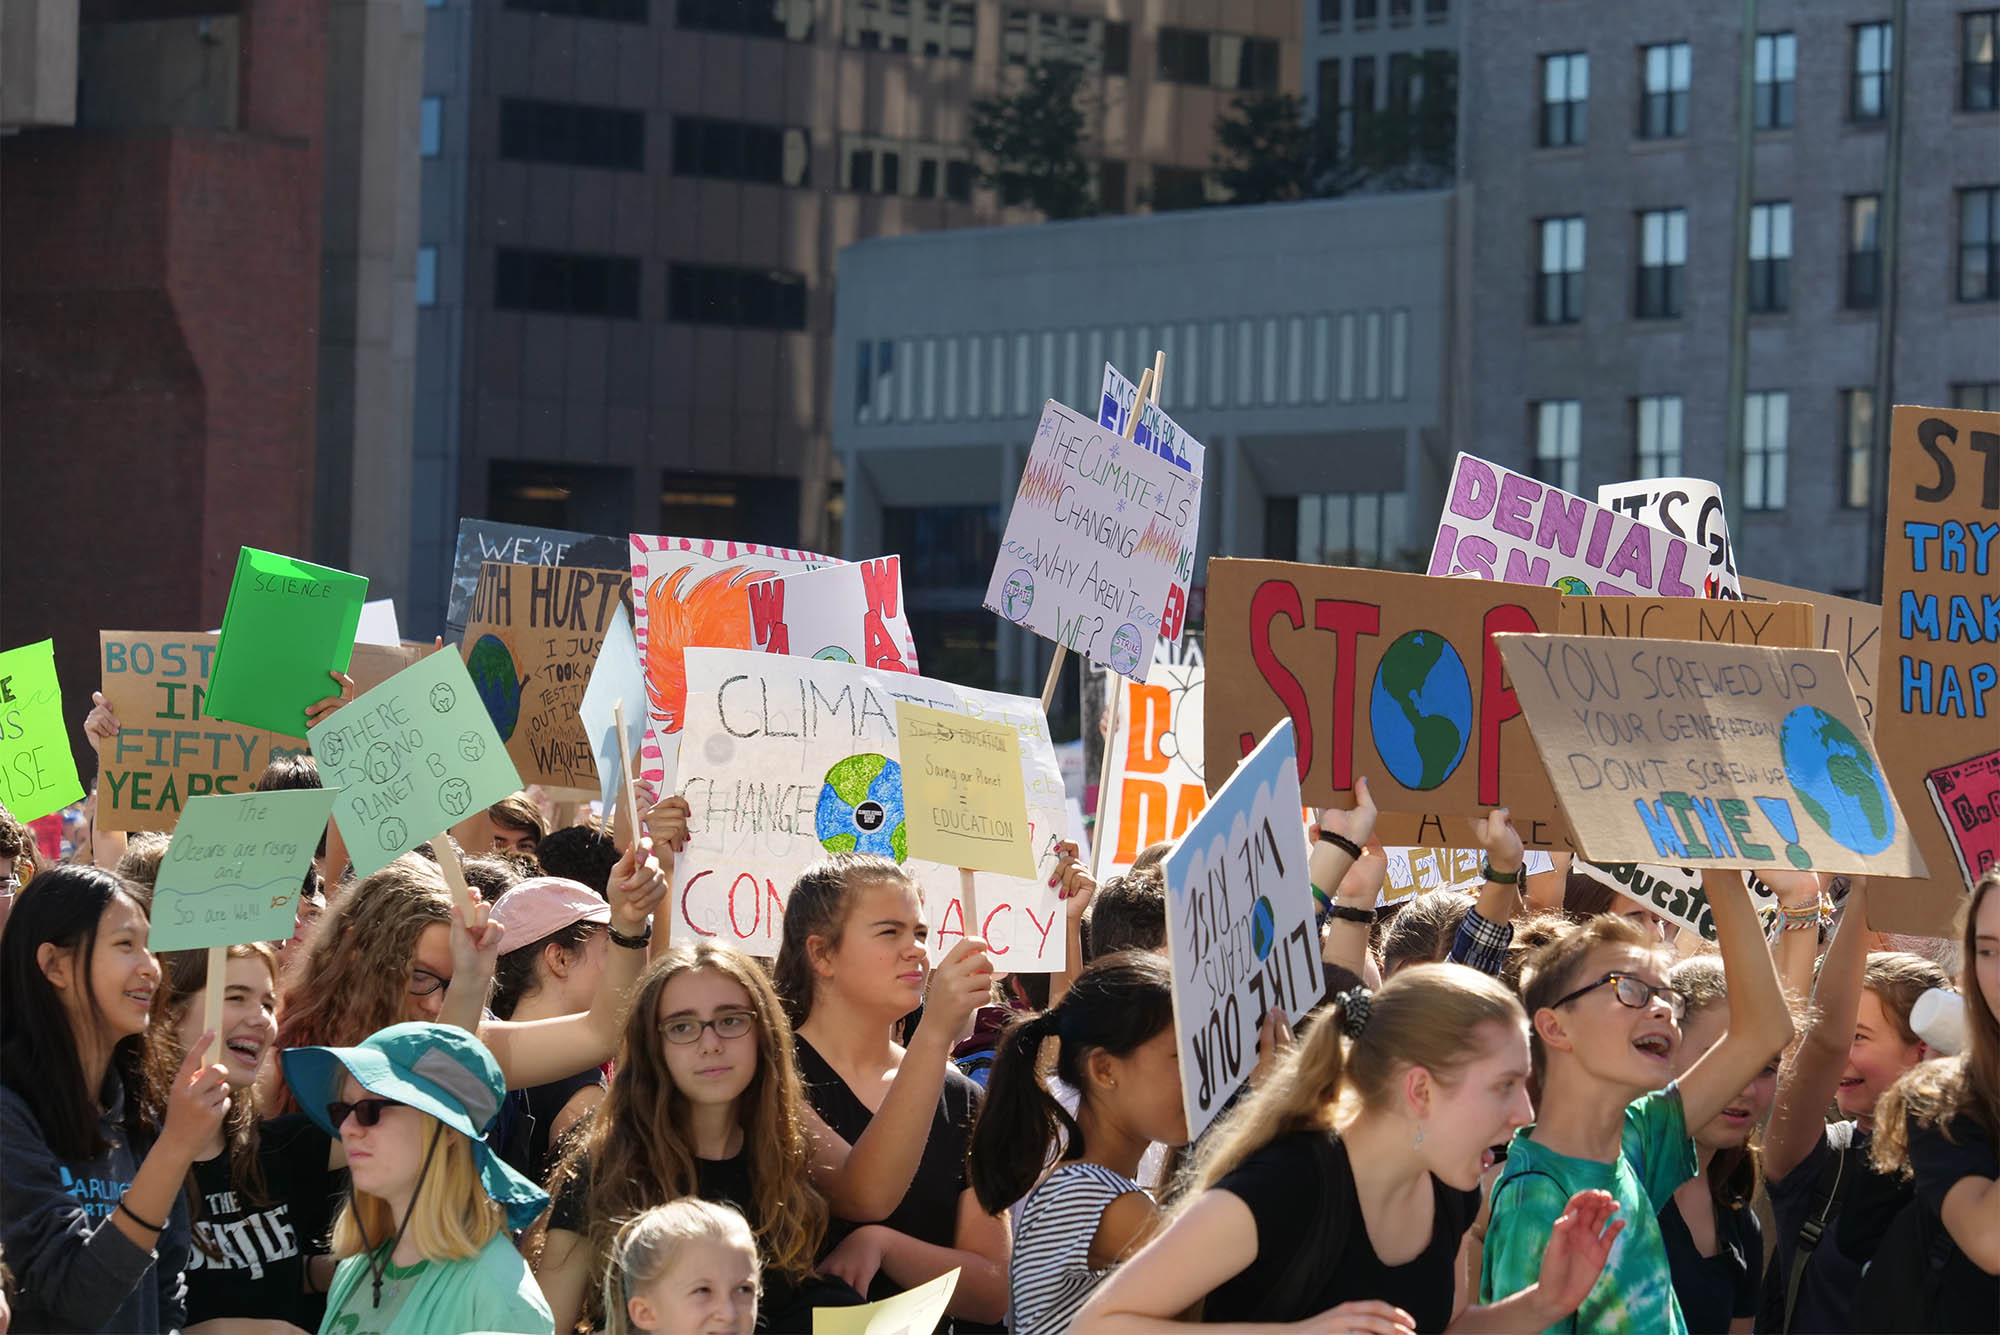 The first Global Climate Strike took place in 2019. A crowd of 7,000 young people gathered in Boston to demand action on climate change. Photo by Jamie Garuti